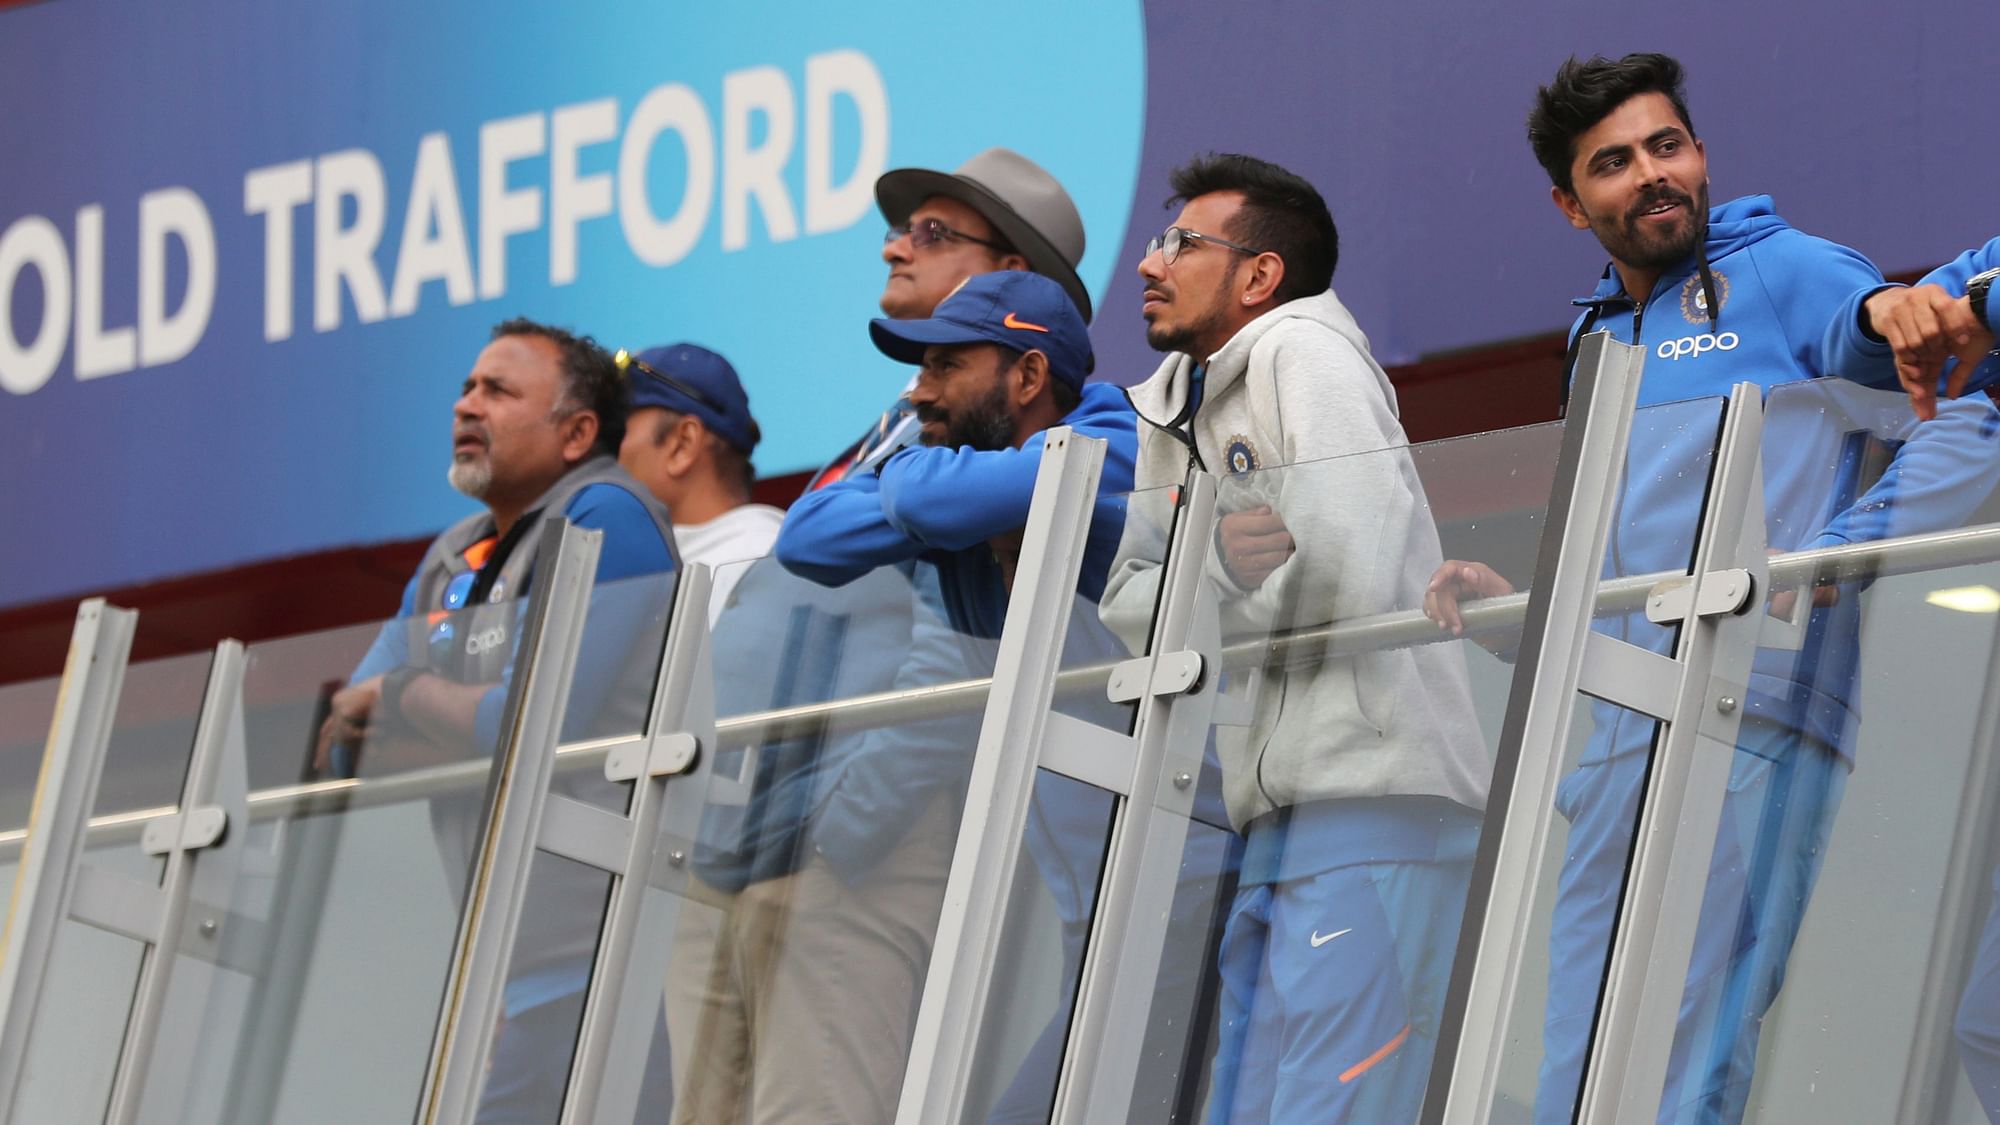 India had New Zealand at 211/5 before rain stopped play in the first semi-final of the 2019 ICC World Cup.